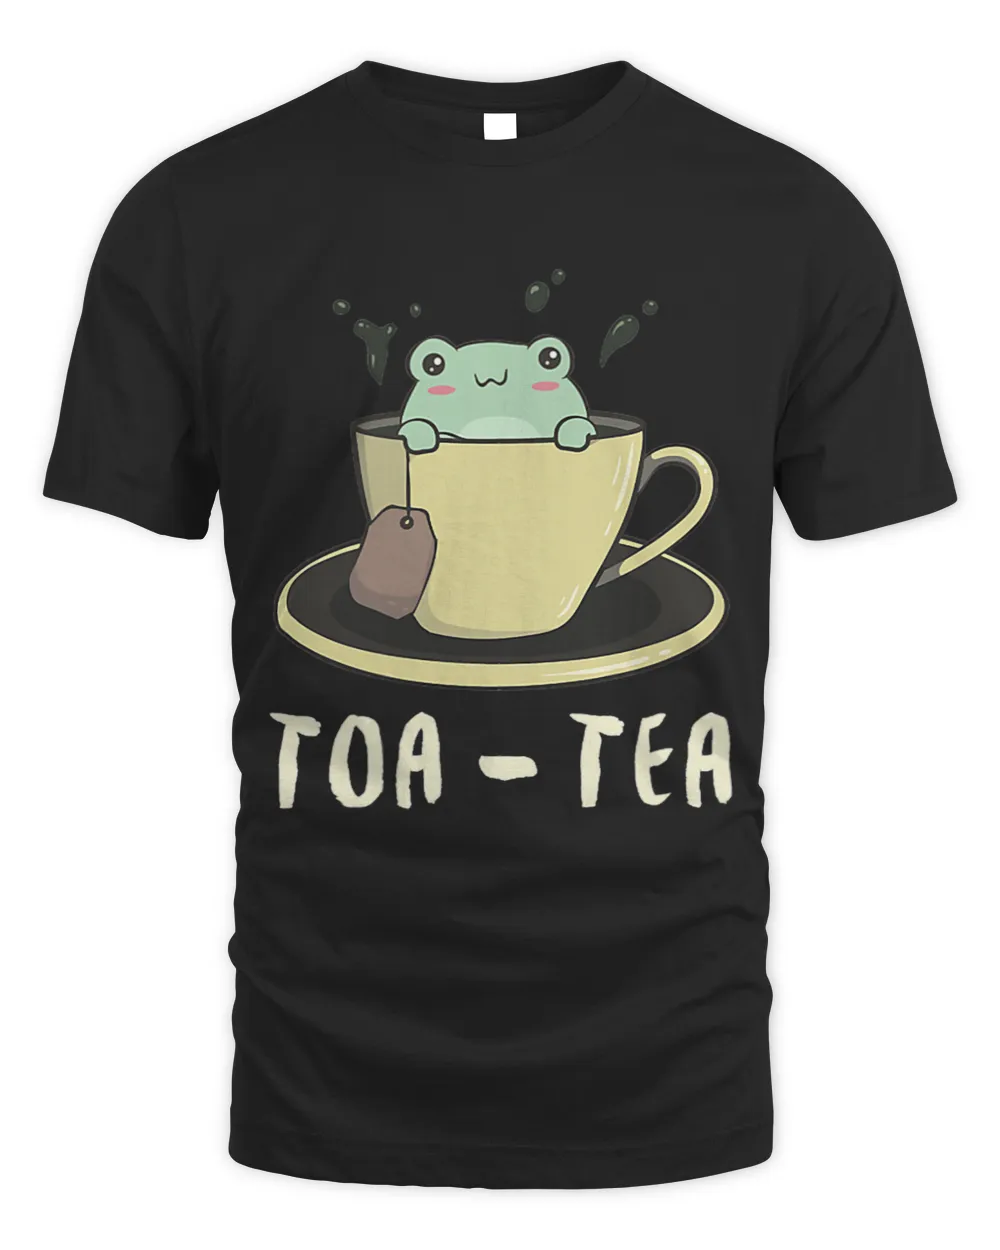 Froggy Frog Cottagecore Aesthetic Kawaii Frog Toad Toa Tea In A Tea Cup3 Frogs